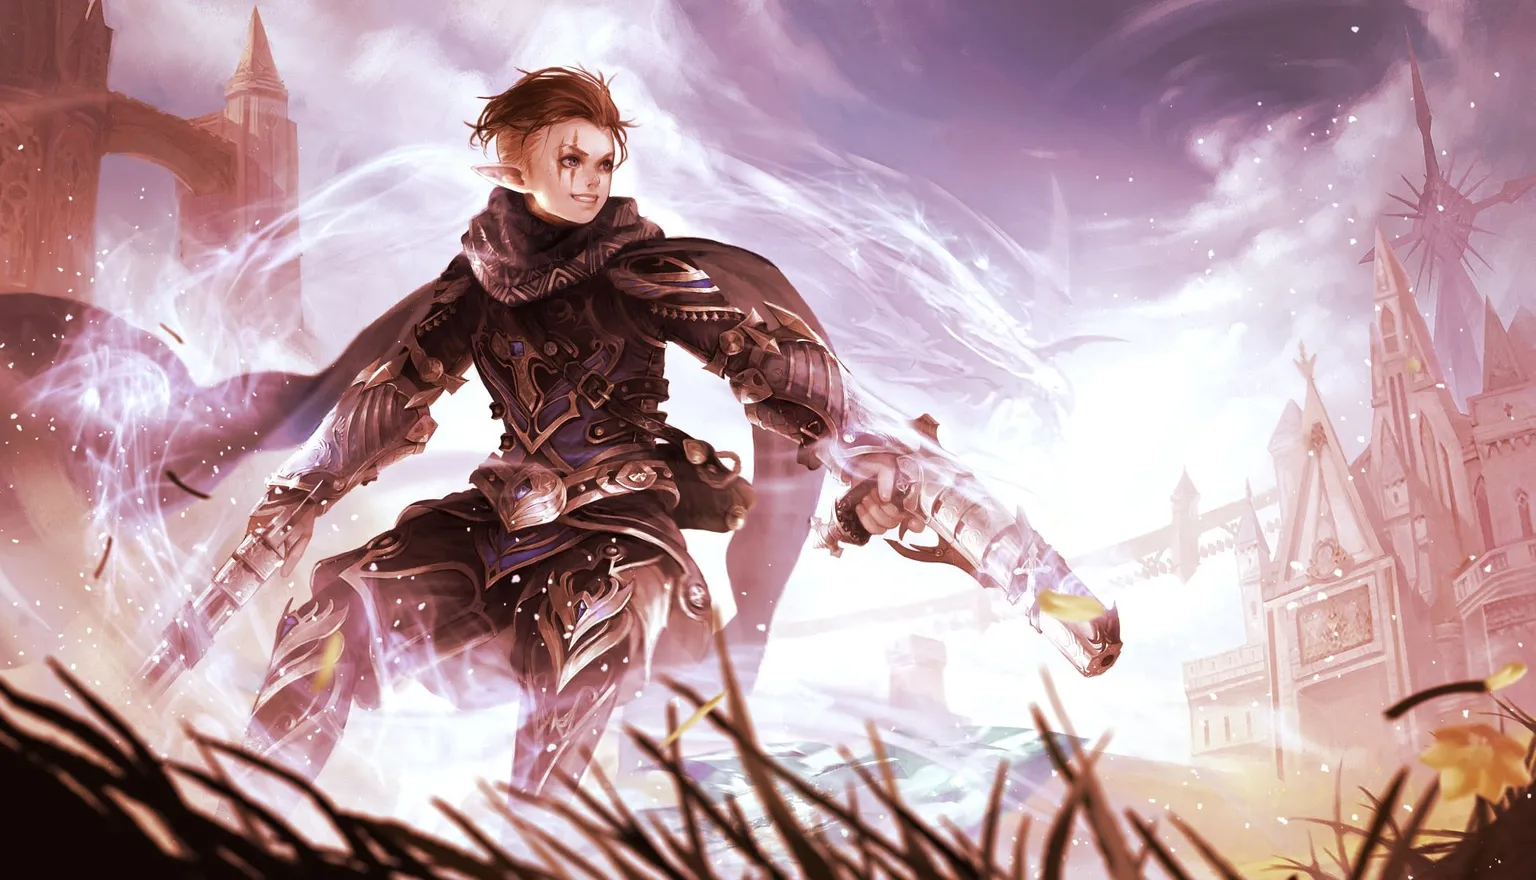 Artwork from NCSoft's game, Lineage II: Aden. Image: NCSoft